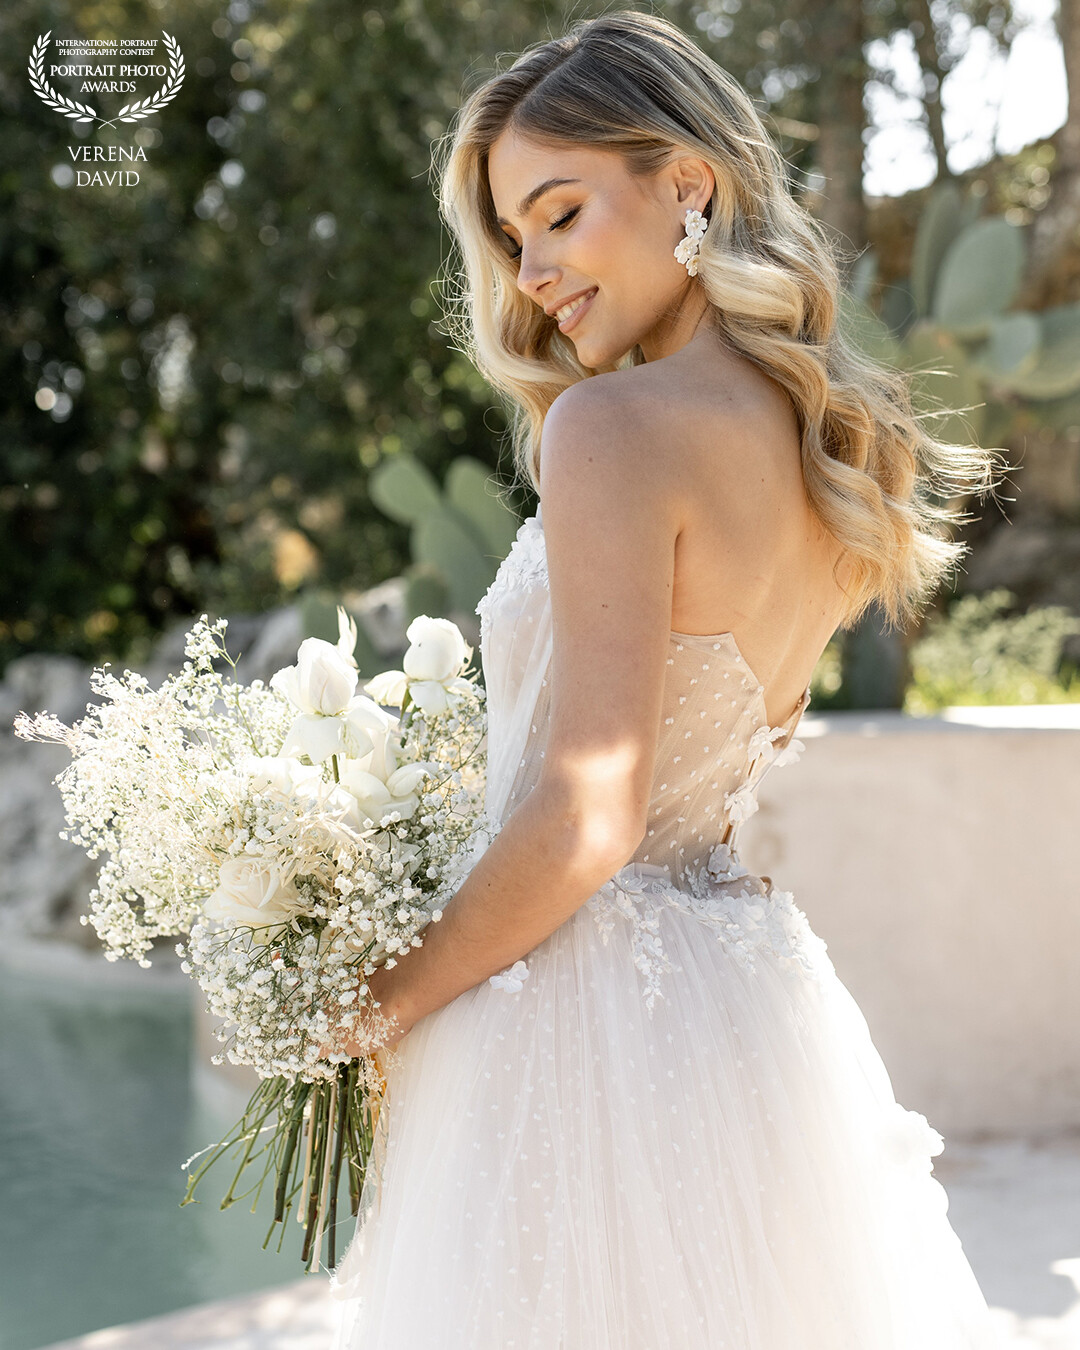 Bridal shooting on a finca in Mallorca. White and Cream very classy style. <br />
<br />
Special thanks to the team:<br />
Concept by: @mosaiquephotography<br />
Decoration & Flowers: @twonakedsouls<br />
Location: @casatwonakedsouls<br />
Rentals: @totapunteventscatering<br />
Keramik: @by.nicita<br />
Dress: @brautzauber_darmstadt x @chicnostalgia<br />
Rings: @verspoor_trauringe<br />
Cake & sweets: @tartamaniabodasmallorca<br />
Jewelry: @dilaaccessoires<br />
Make-up & Hair: @izzygunkel<br />
Models: @victoriabonetv<br />
Stationery: @14shubat